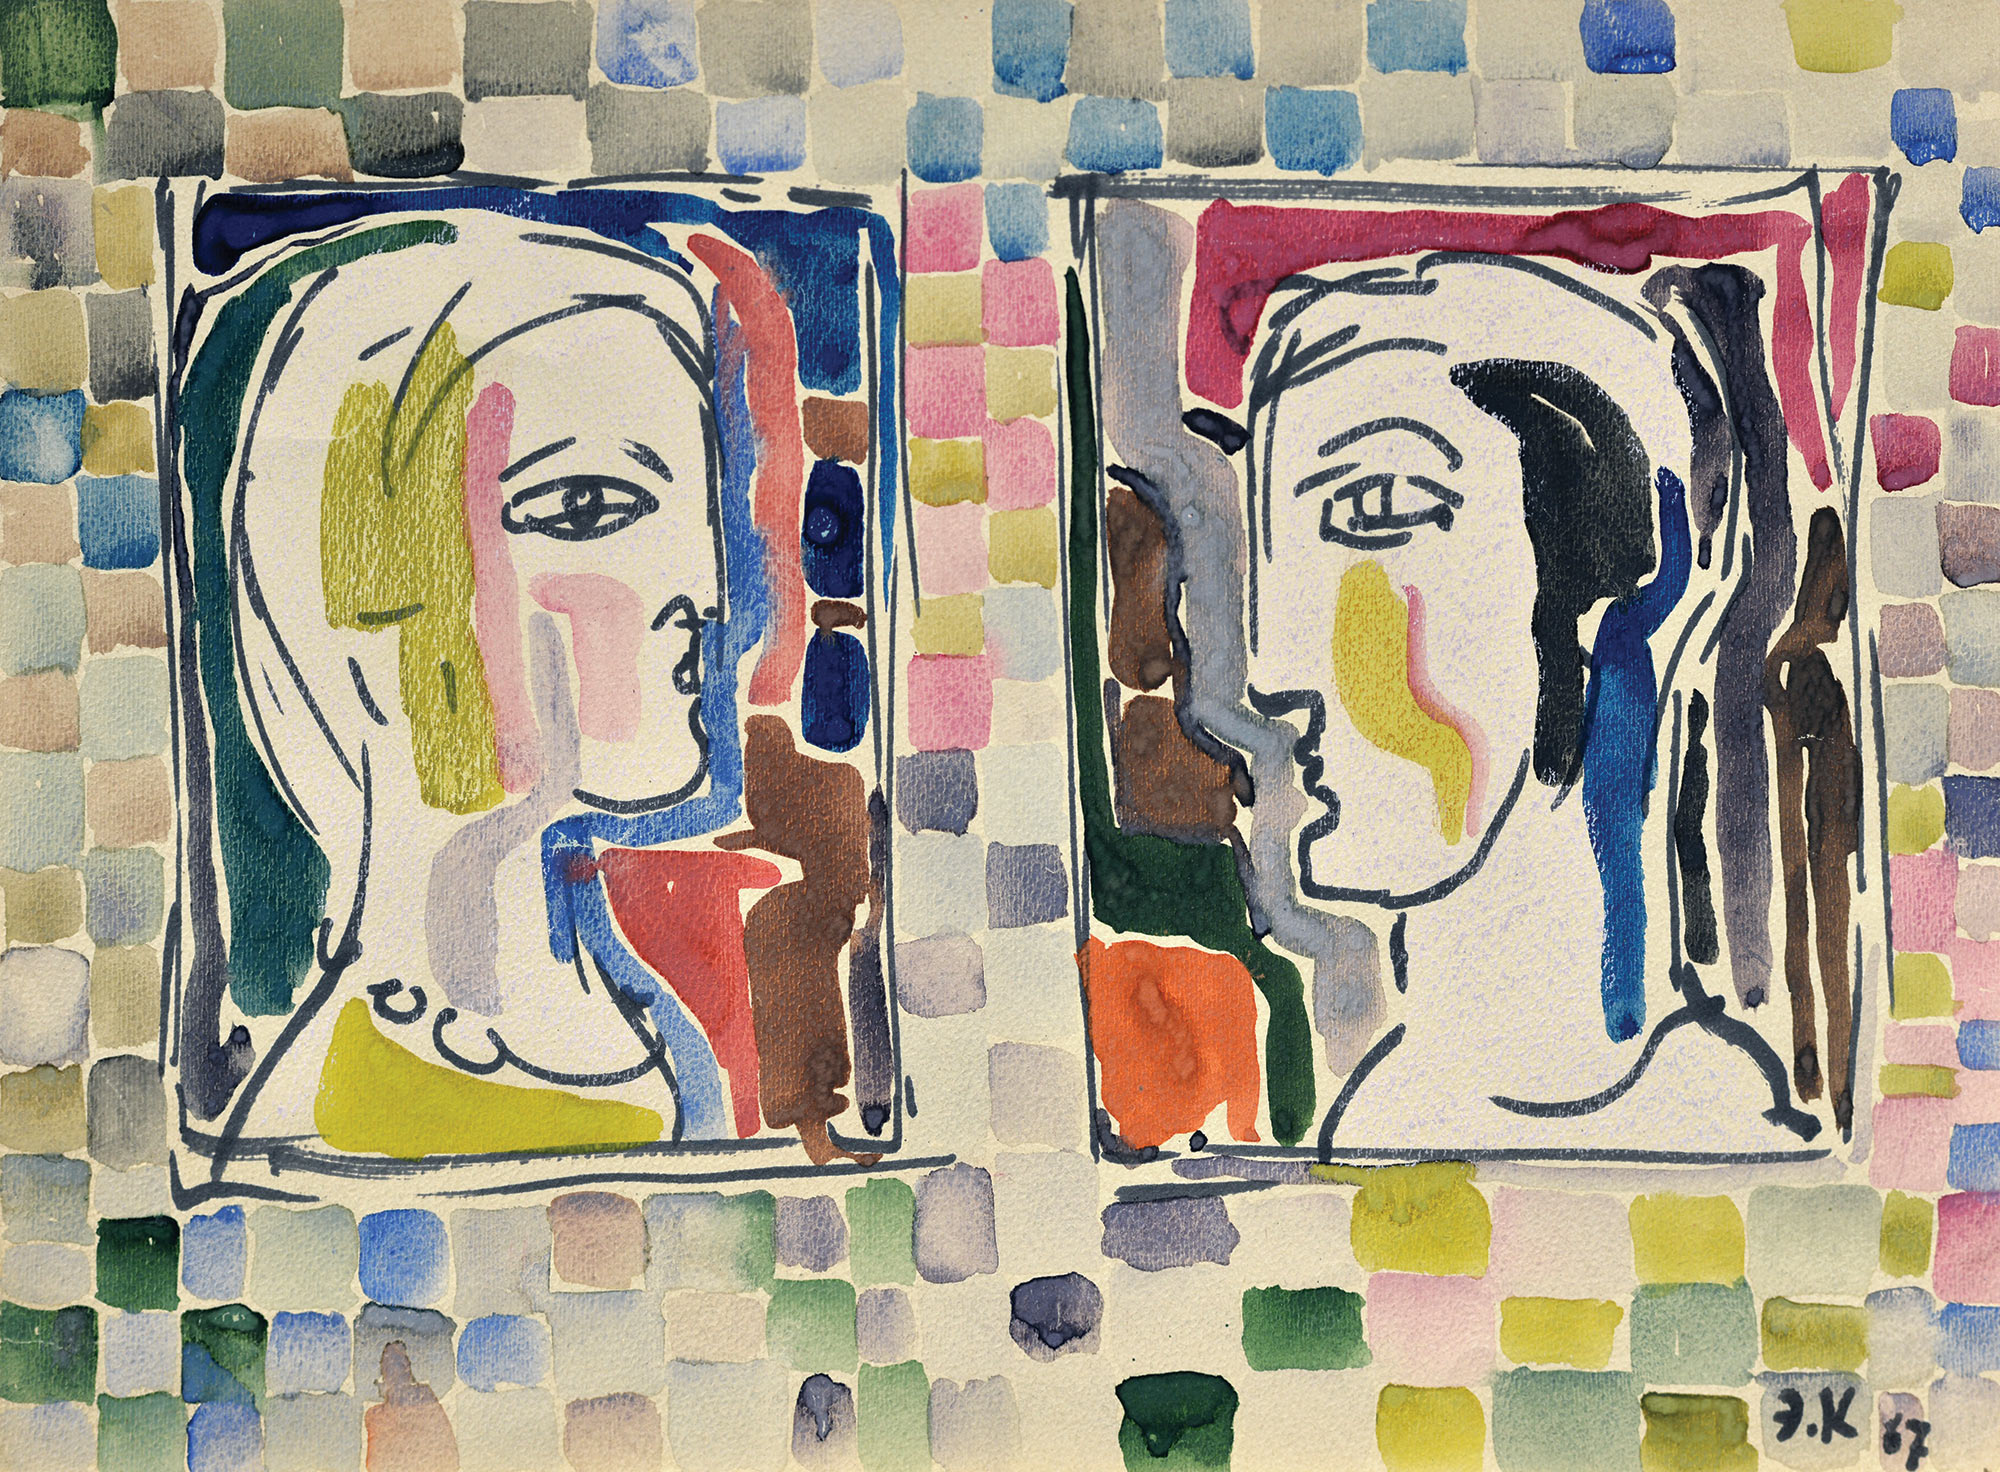 "Two", 1967